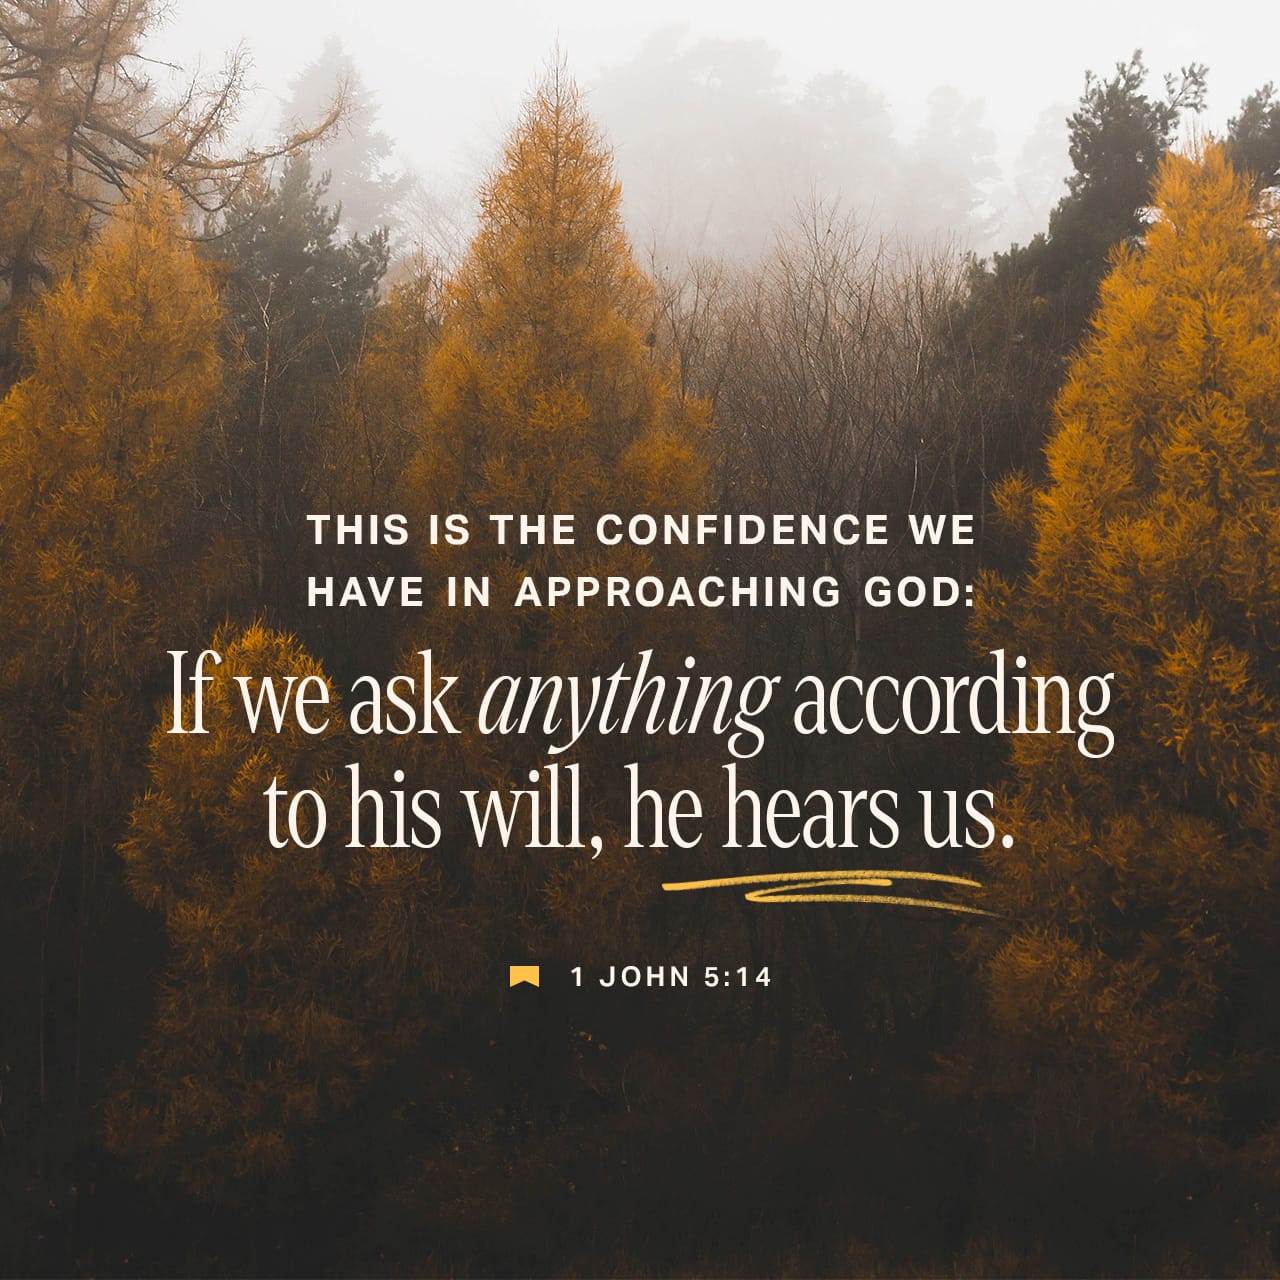 I John 5:14-15 Now this is the confidence that we have in Him, that if we  ask anything according to His will, He hears us. And if we know that He  hears